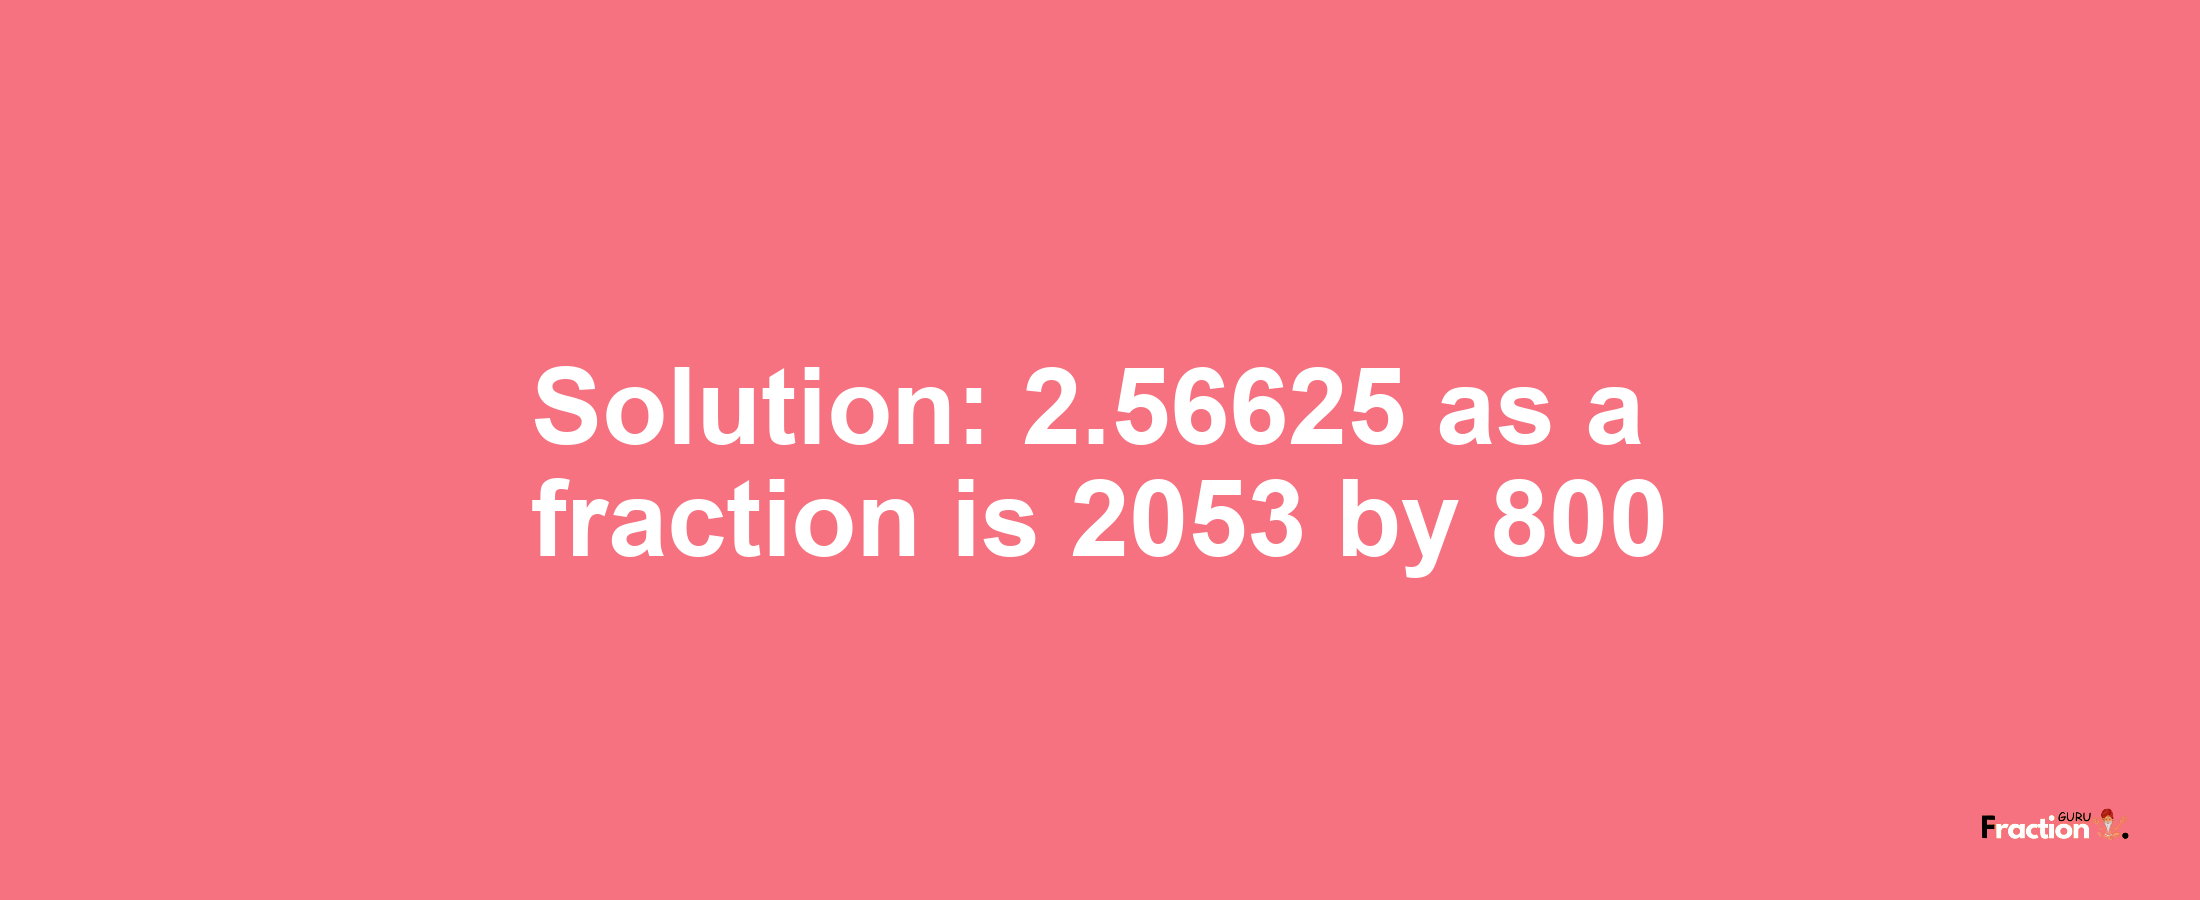 Solution:2.56625 as a fraction is 2053/800